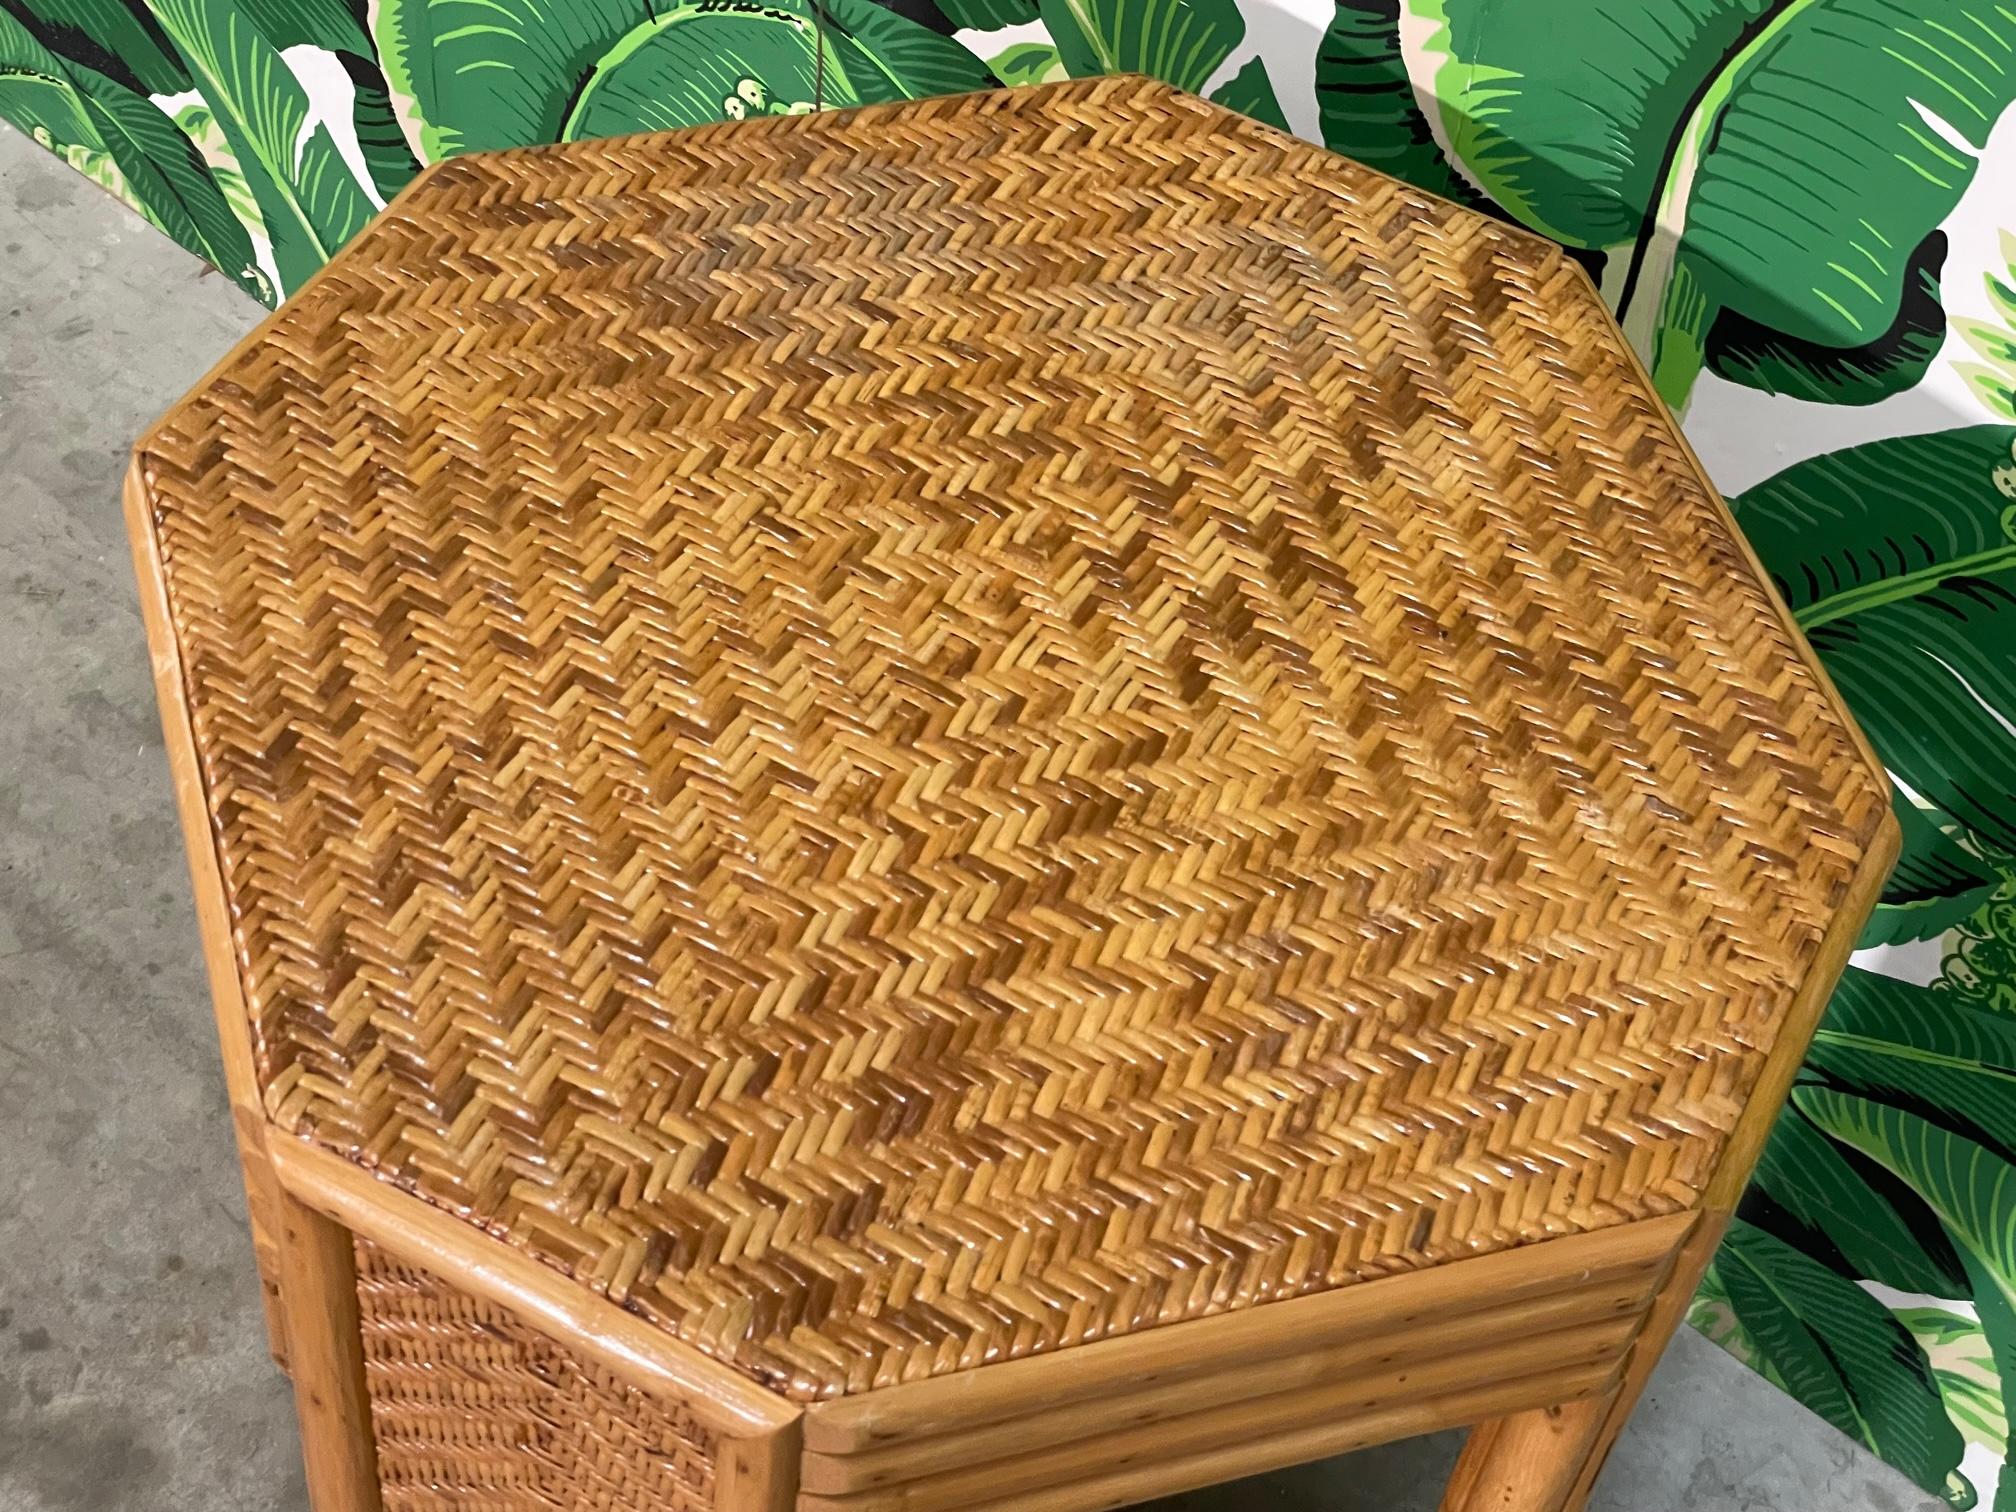 Rattan and Wicker Organic Modern Dining Table Base In Good Condition For Sale In Jacksonville, FL